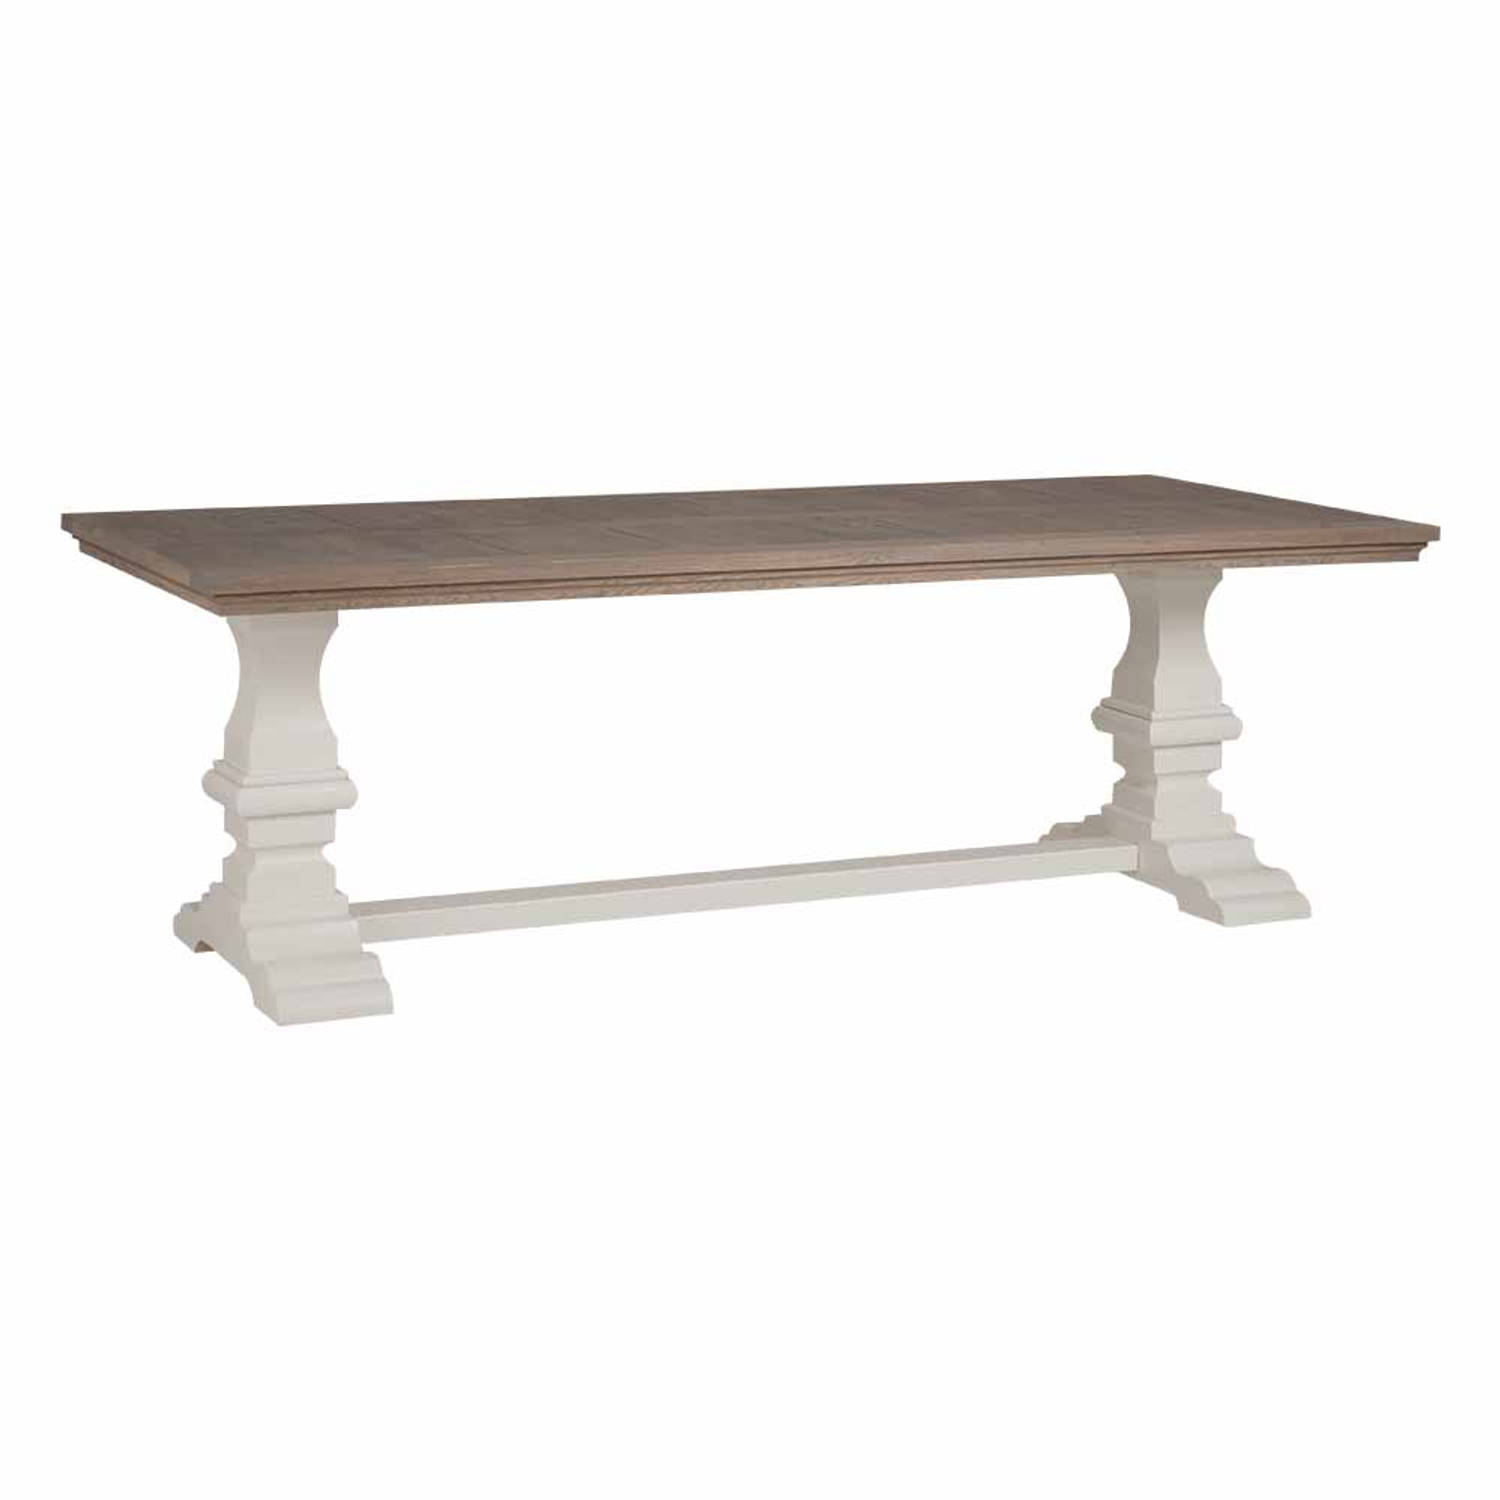 TOFF Toscana - Klooster - dining table 300x100 KD